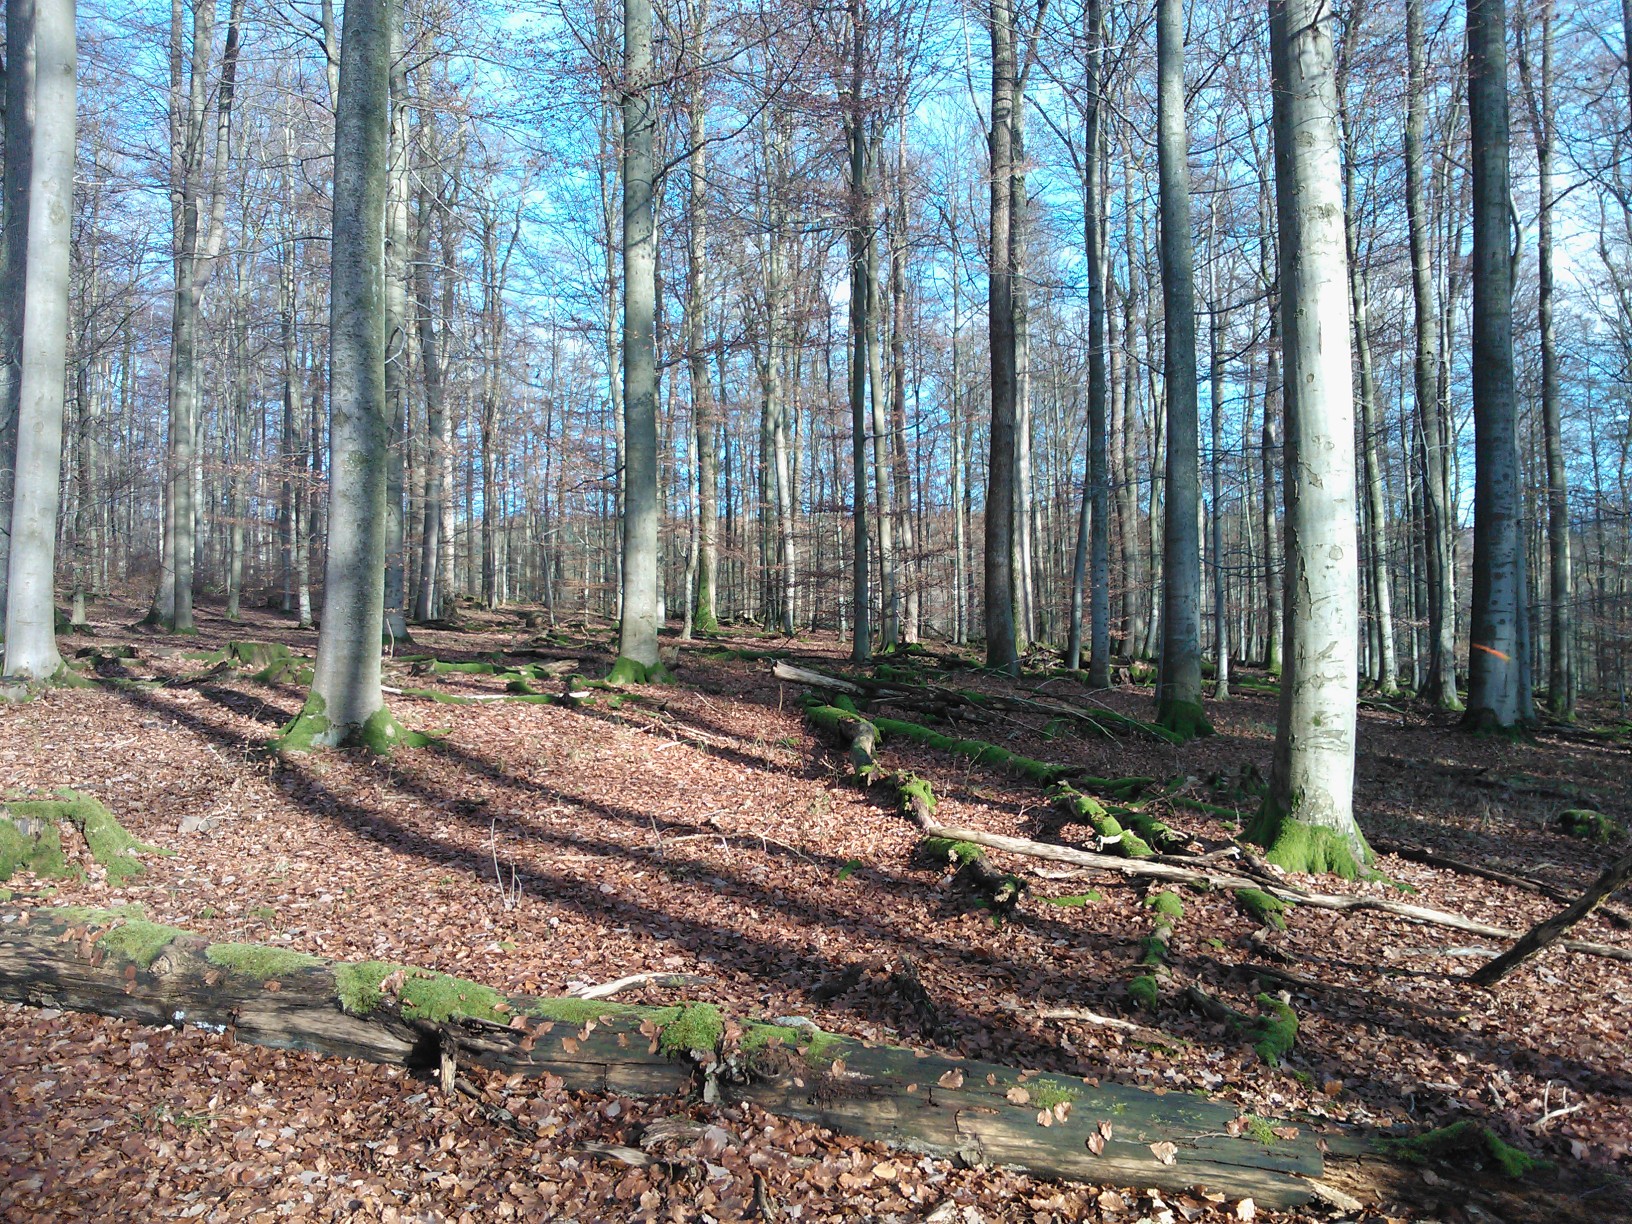 Mature beech forests in Germany offer a variety of ecosystem services, such as timber production and recreation options. Photo: Kai Lintunen